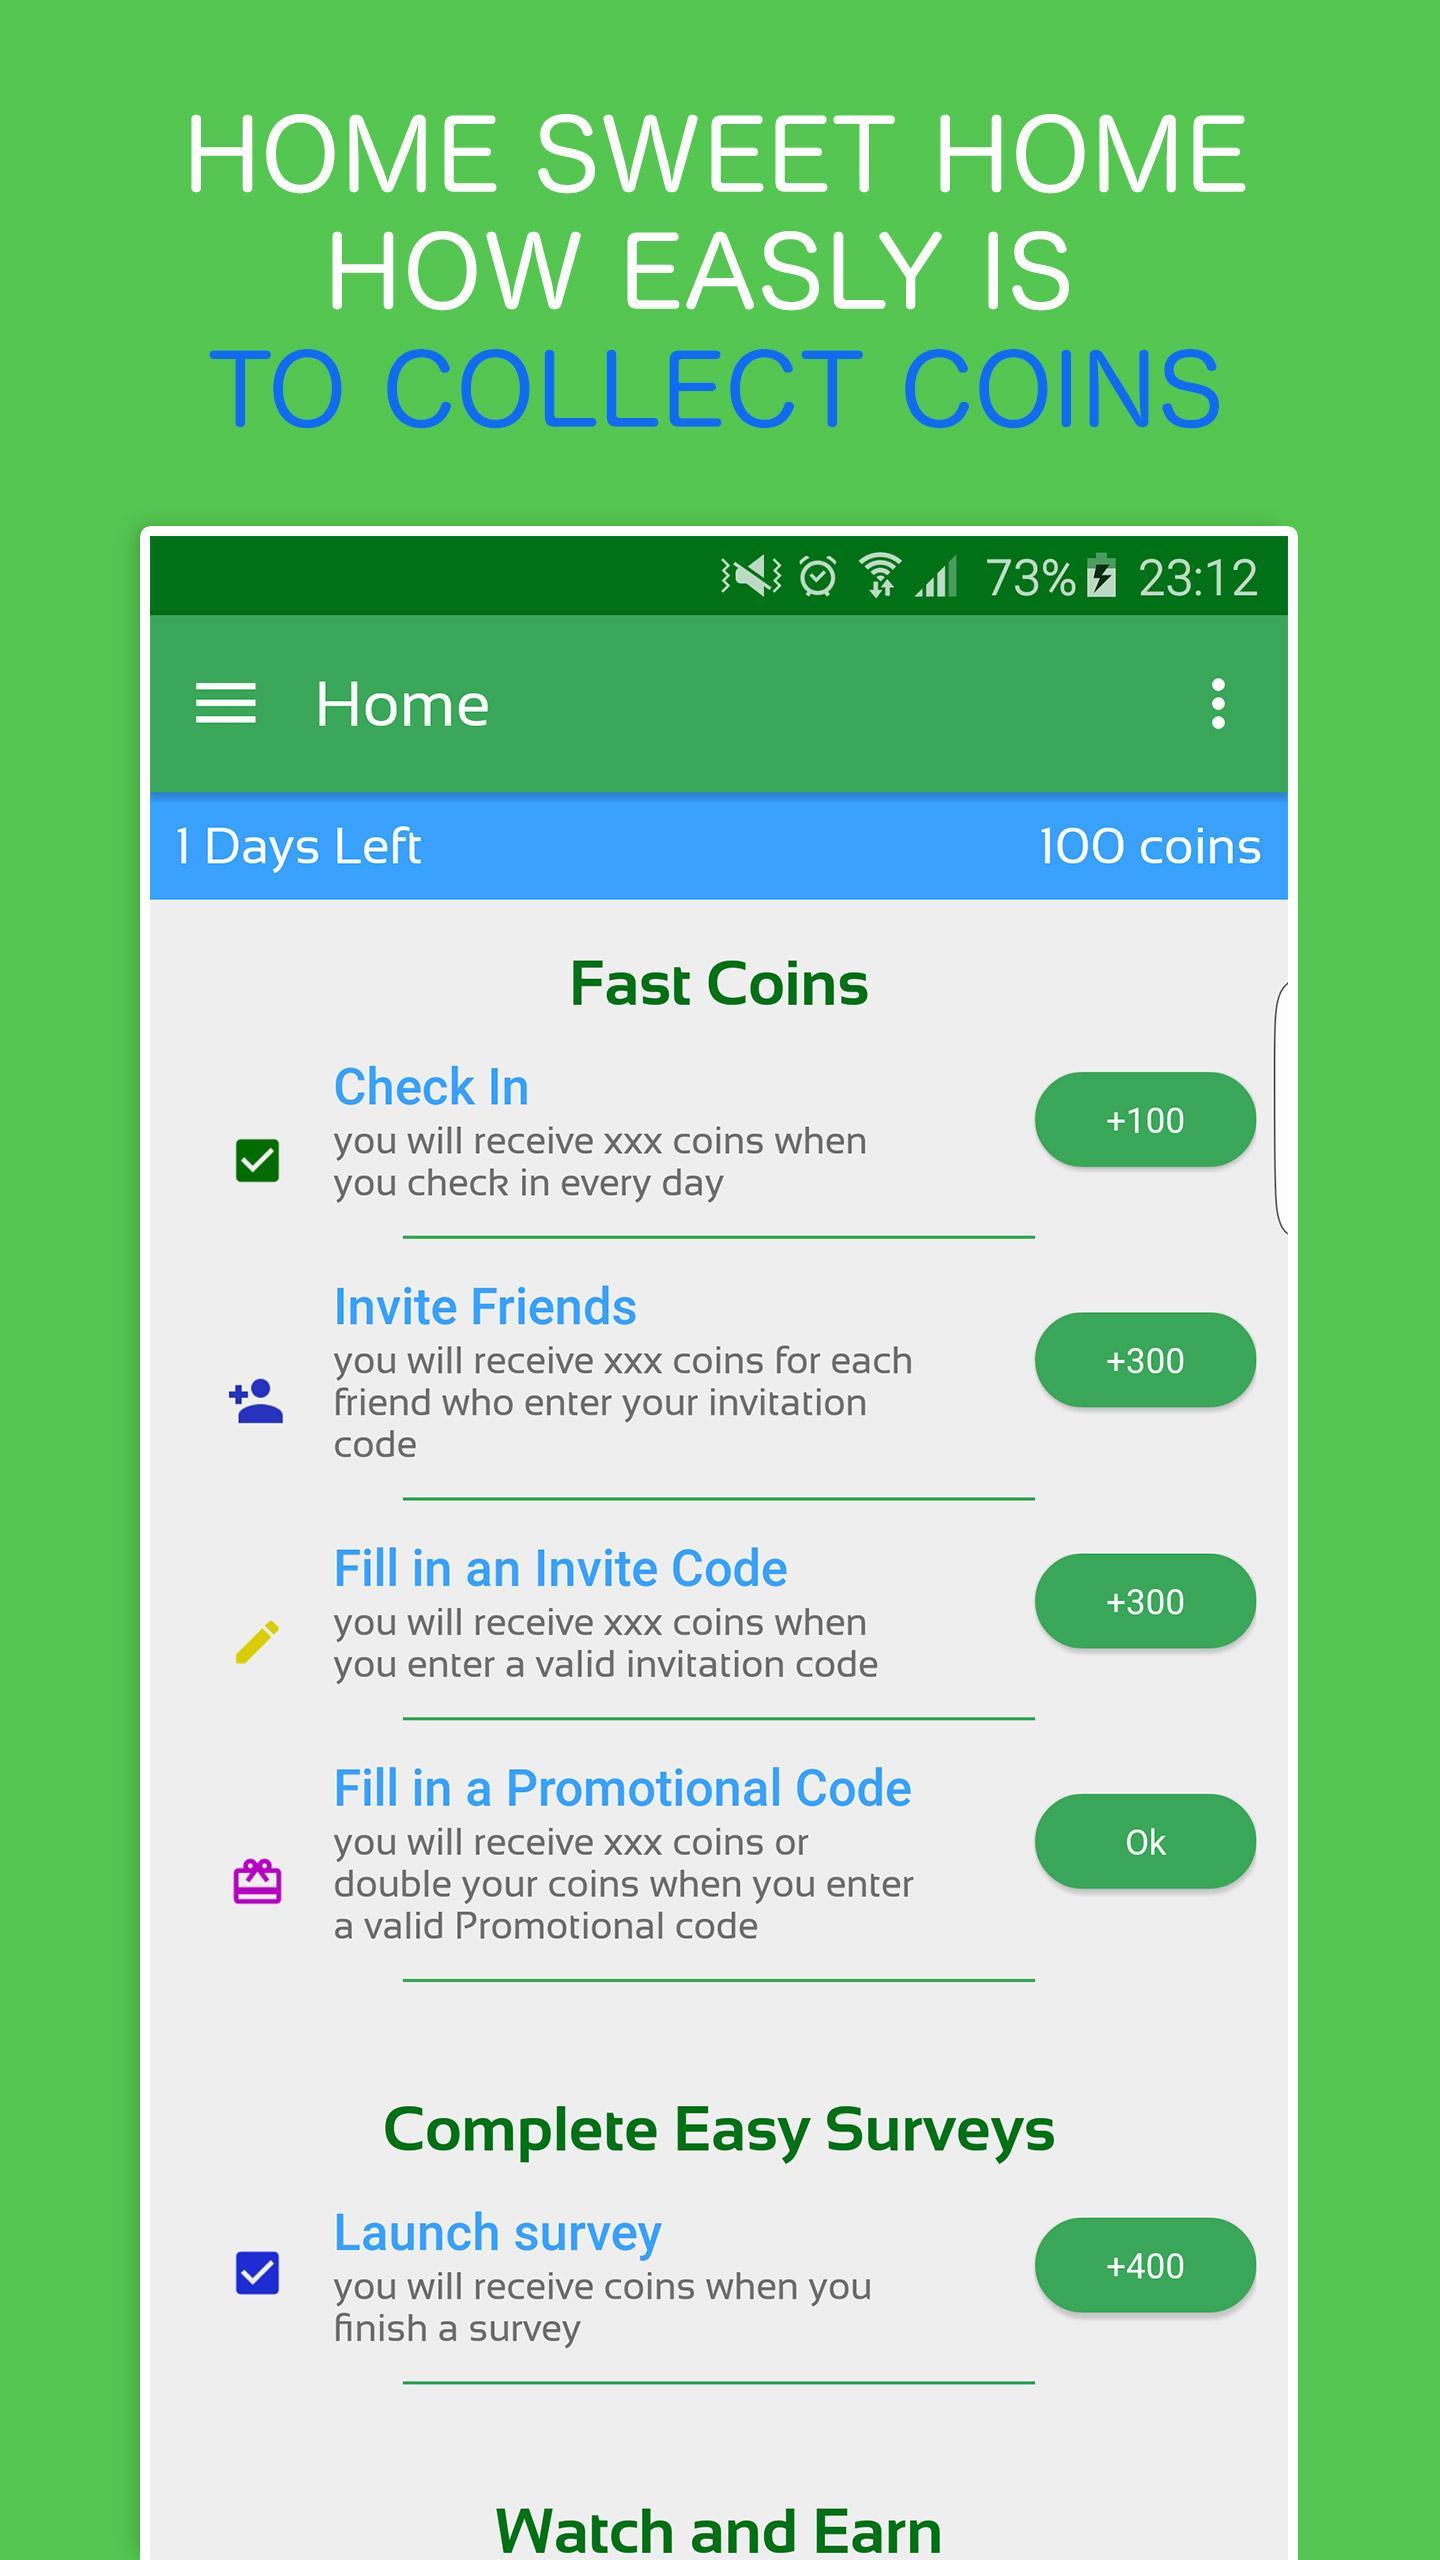 58 HQ Images Cash App Android Requirements : How To Change Your Cash App Pin On Android Or Iphone